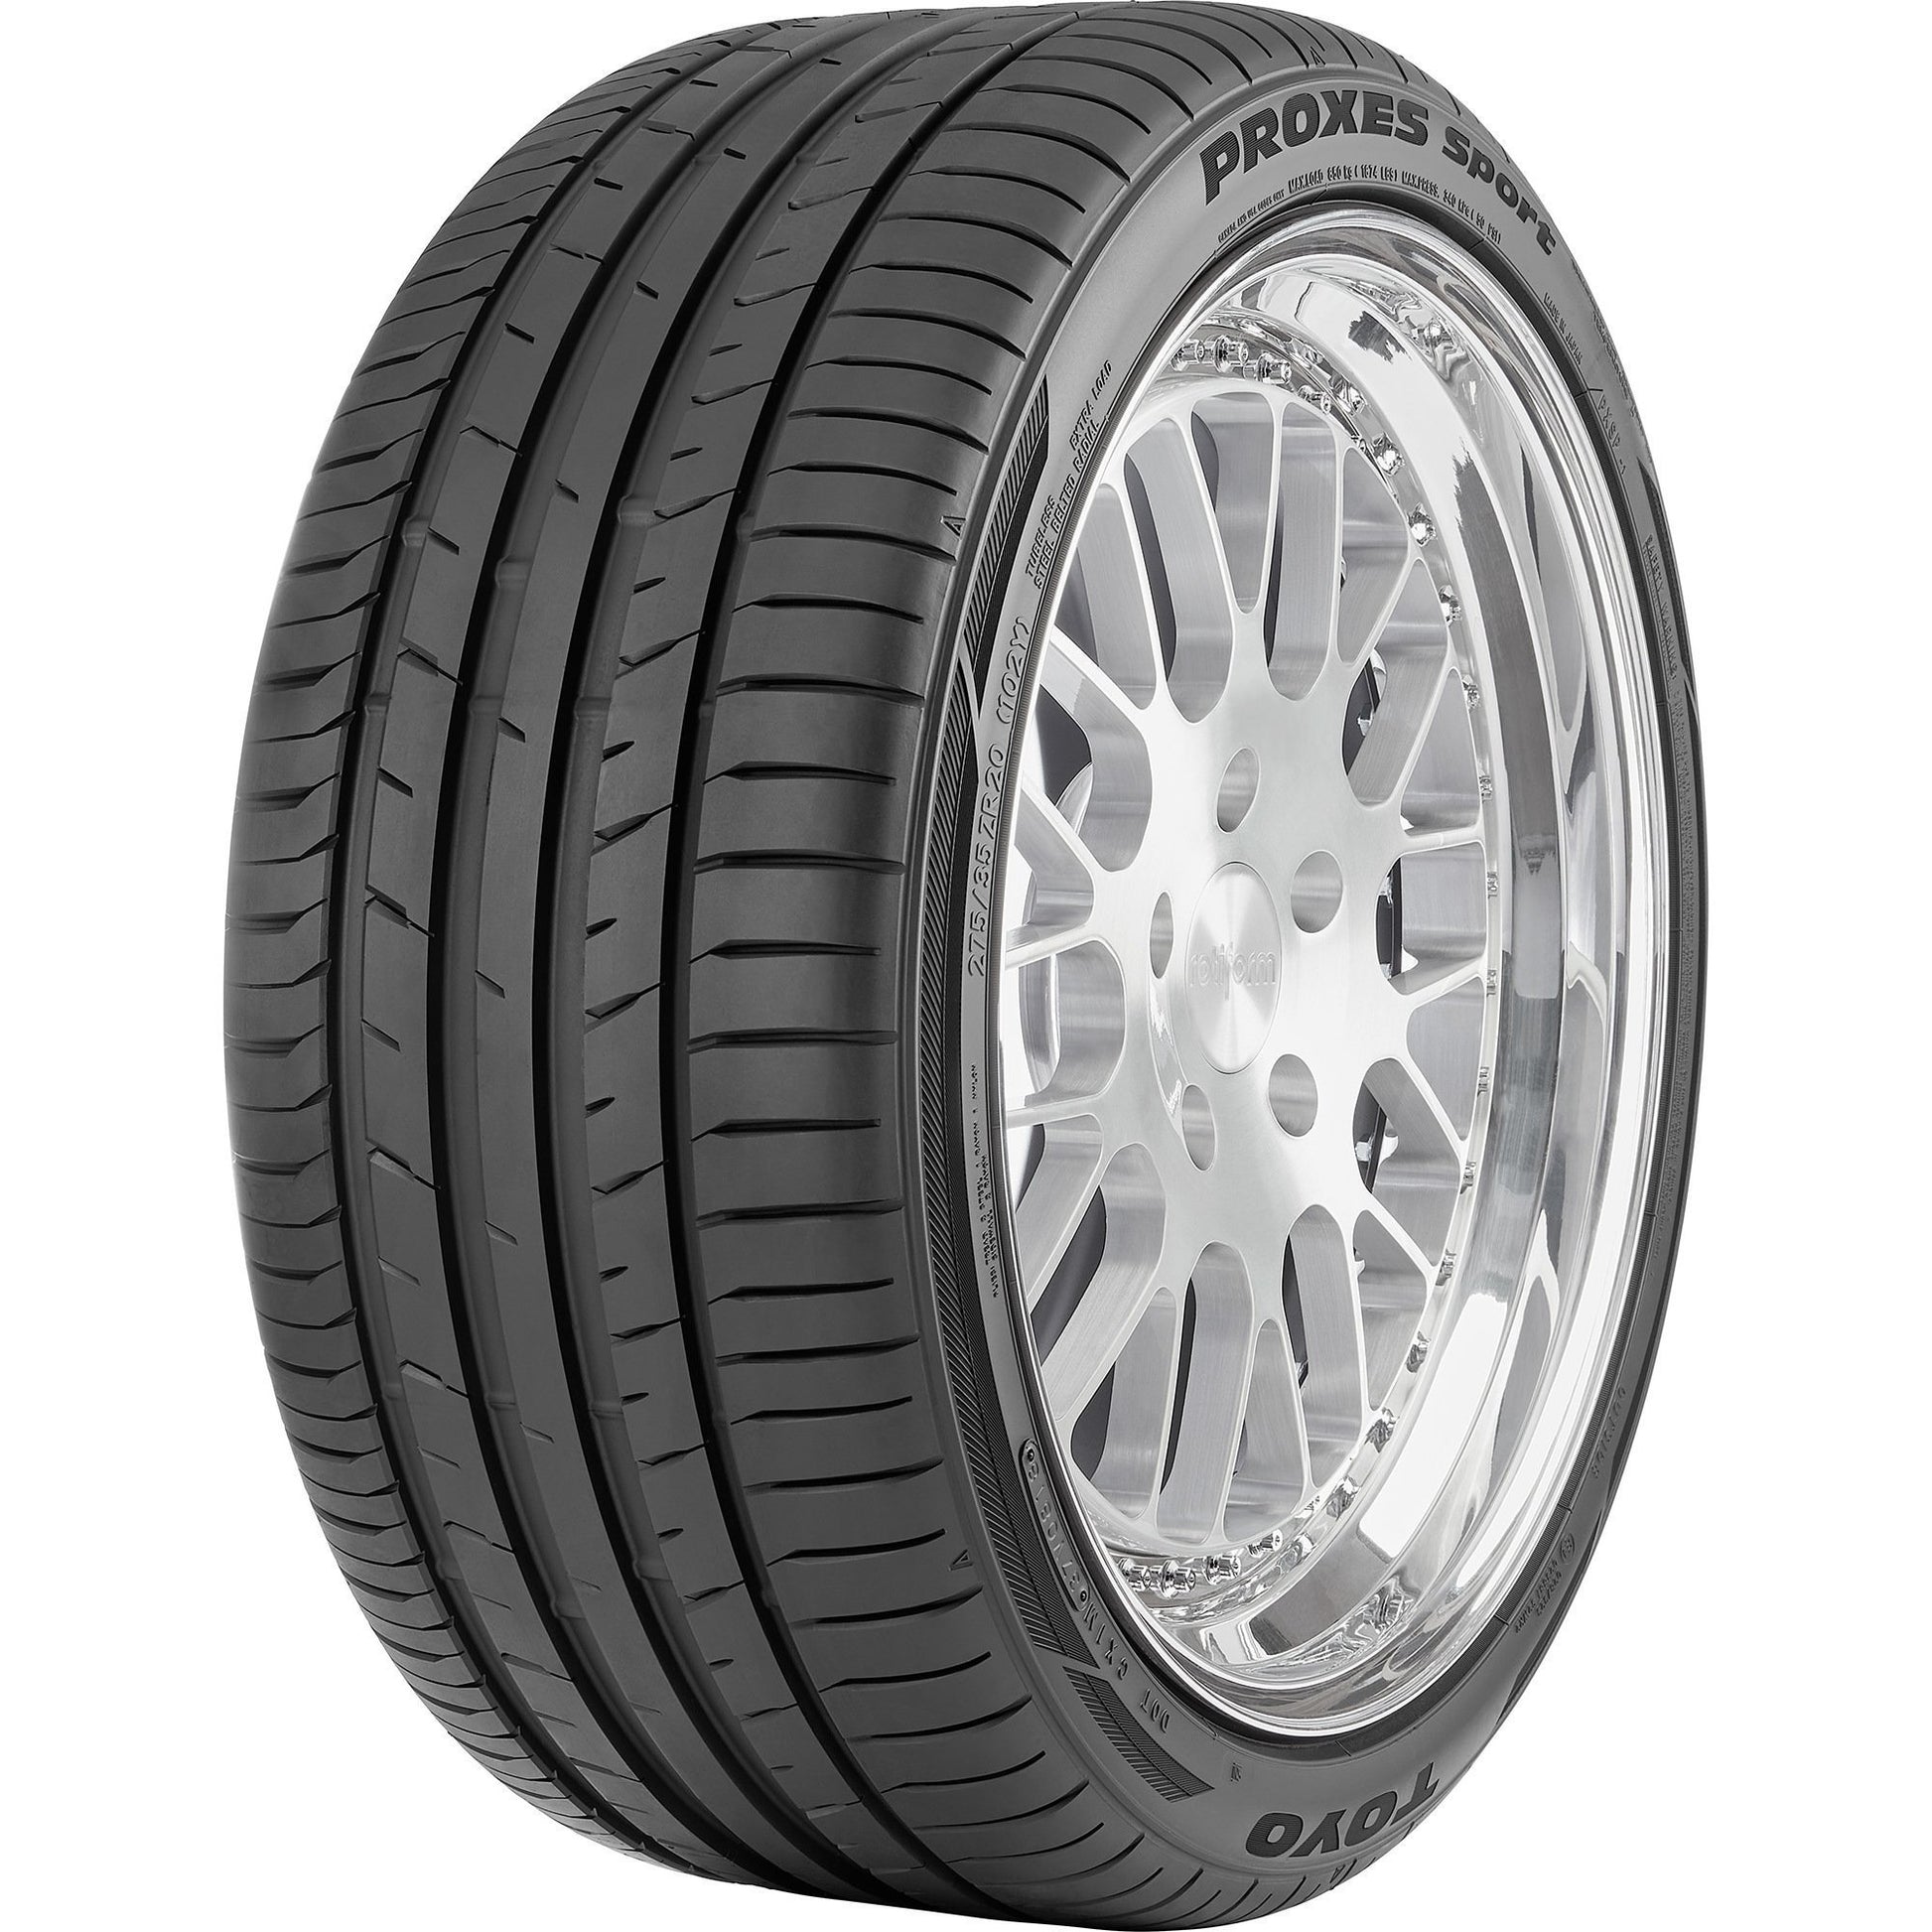 Toyo 225/40R19Xl 93Y Proxes Sport Tire - Universal (136890)-toy136890-136890-Tires-Toyo-225-40-19-JDMuscle